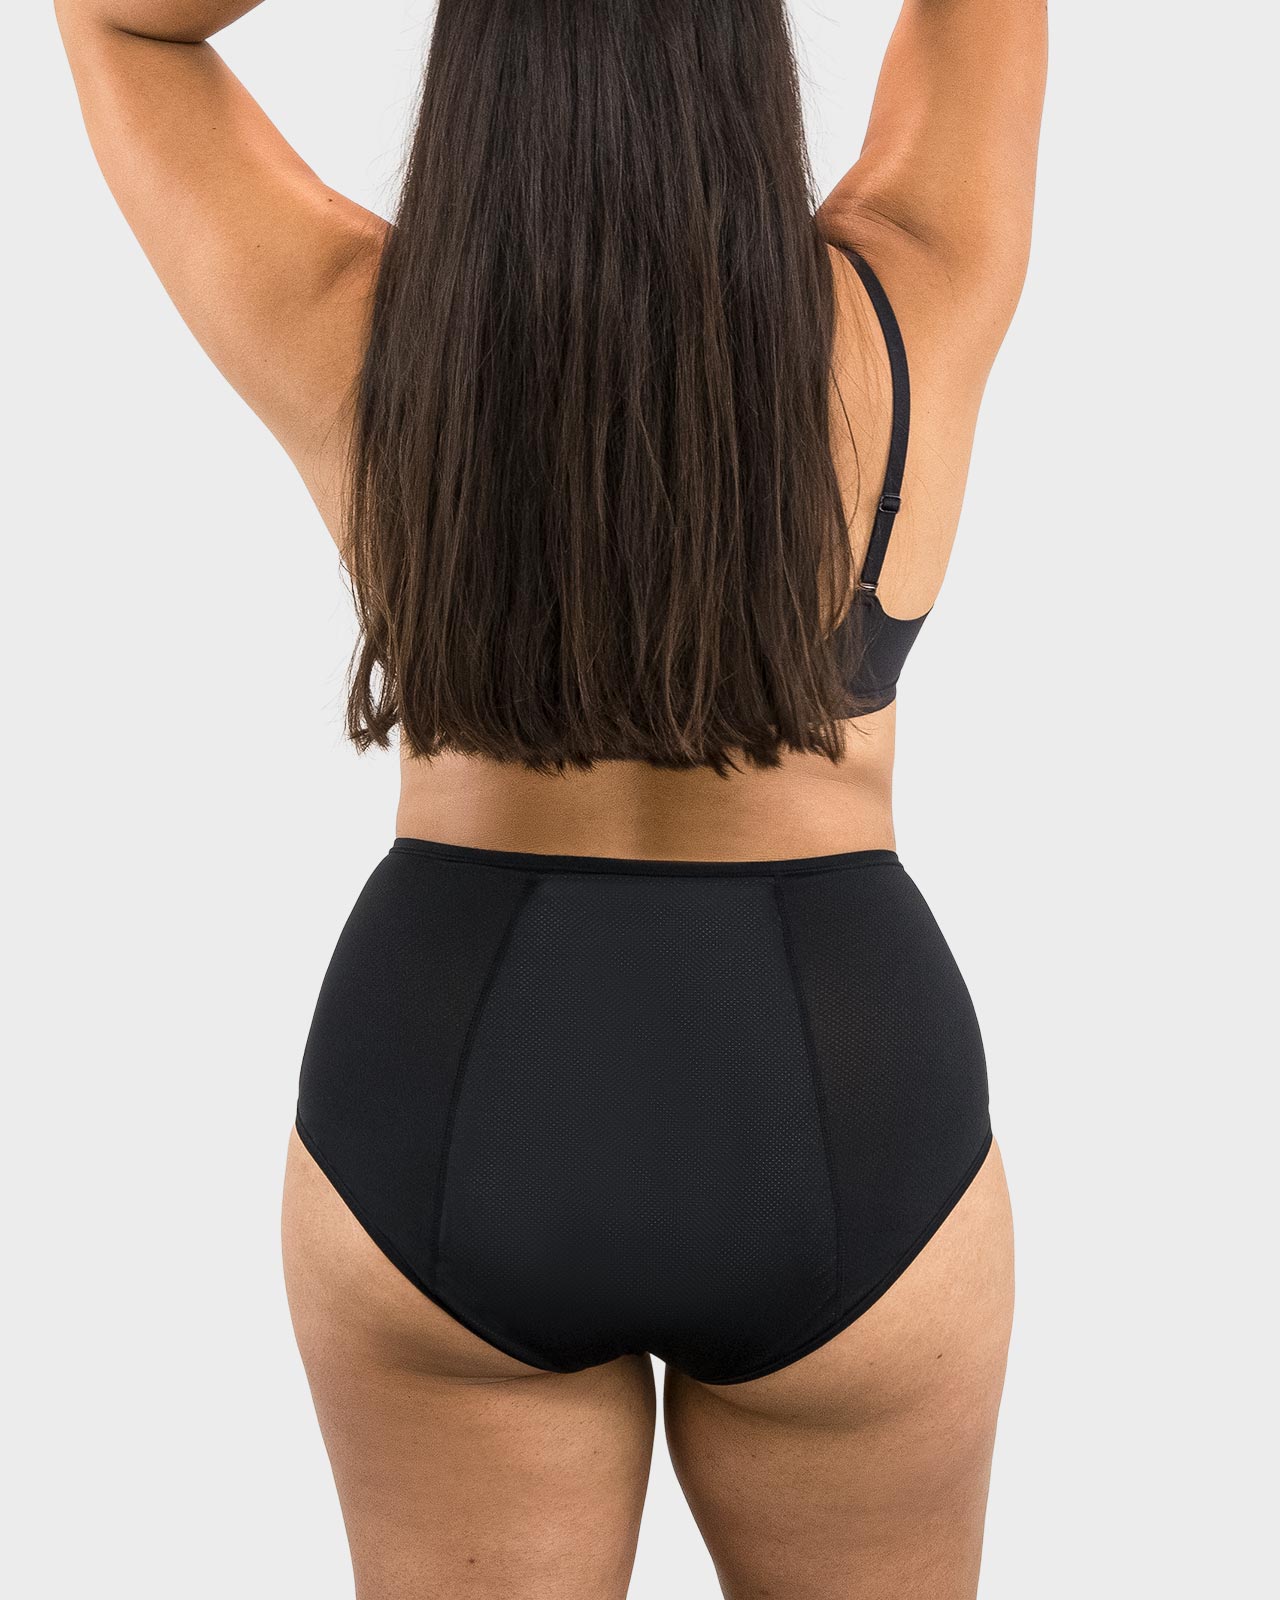 Confortide Ultra Absorbent High-Waisted Period Underwear